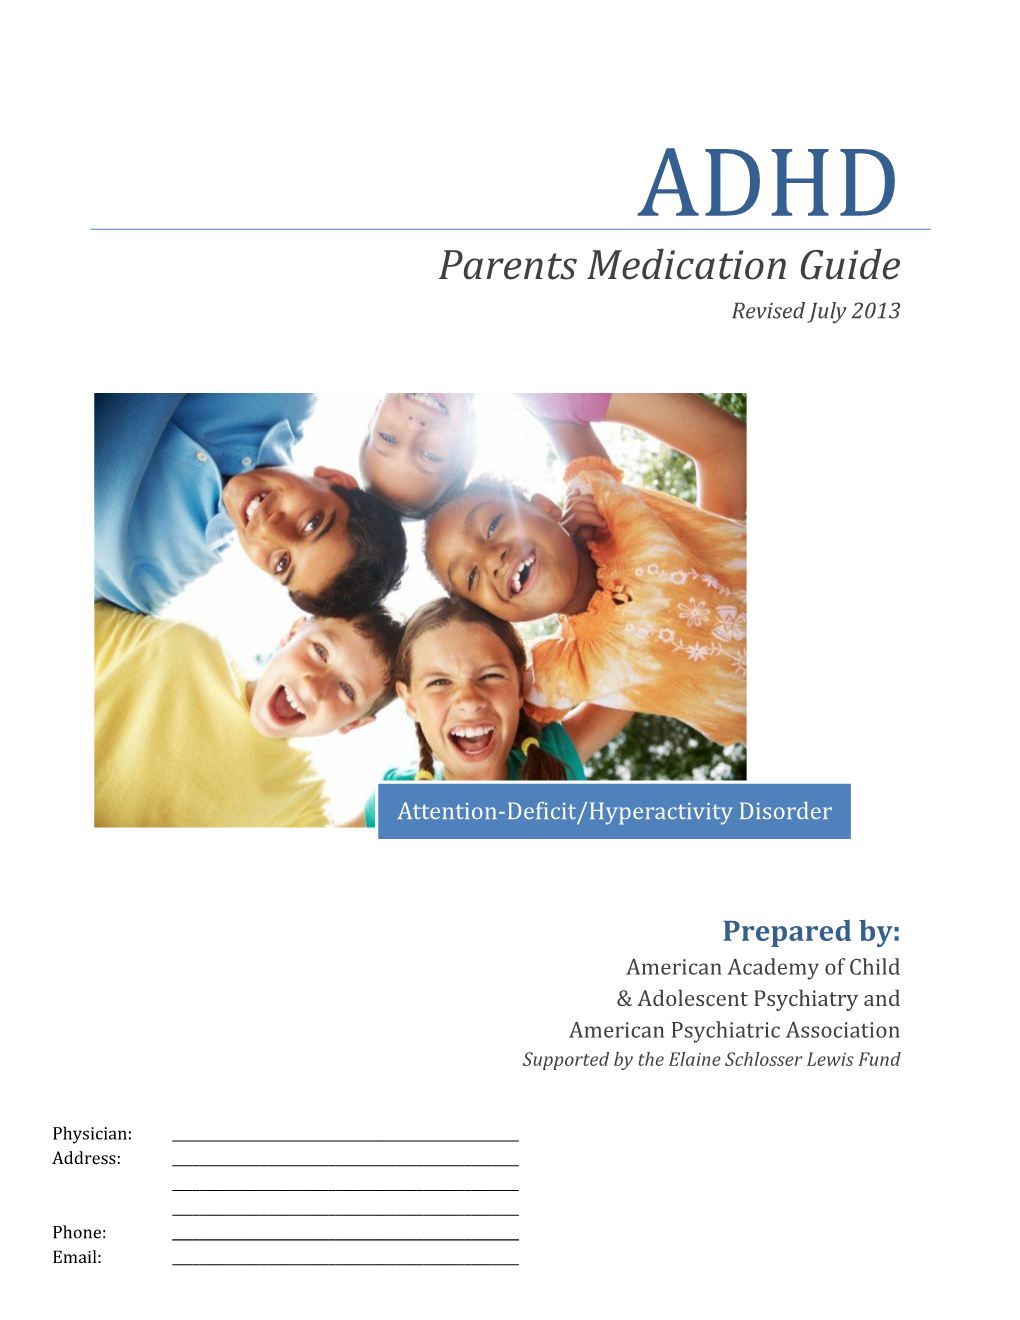 ADHD Parents Medication Guide Revised July 2013